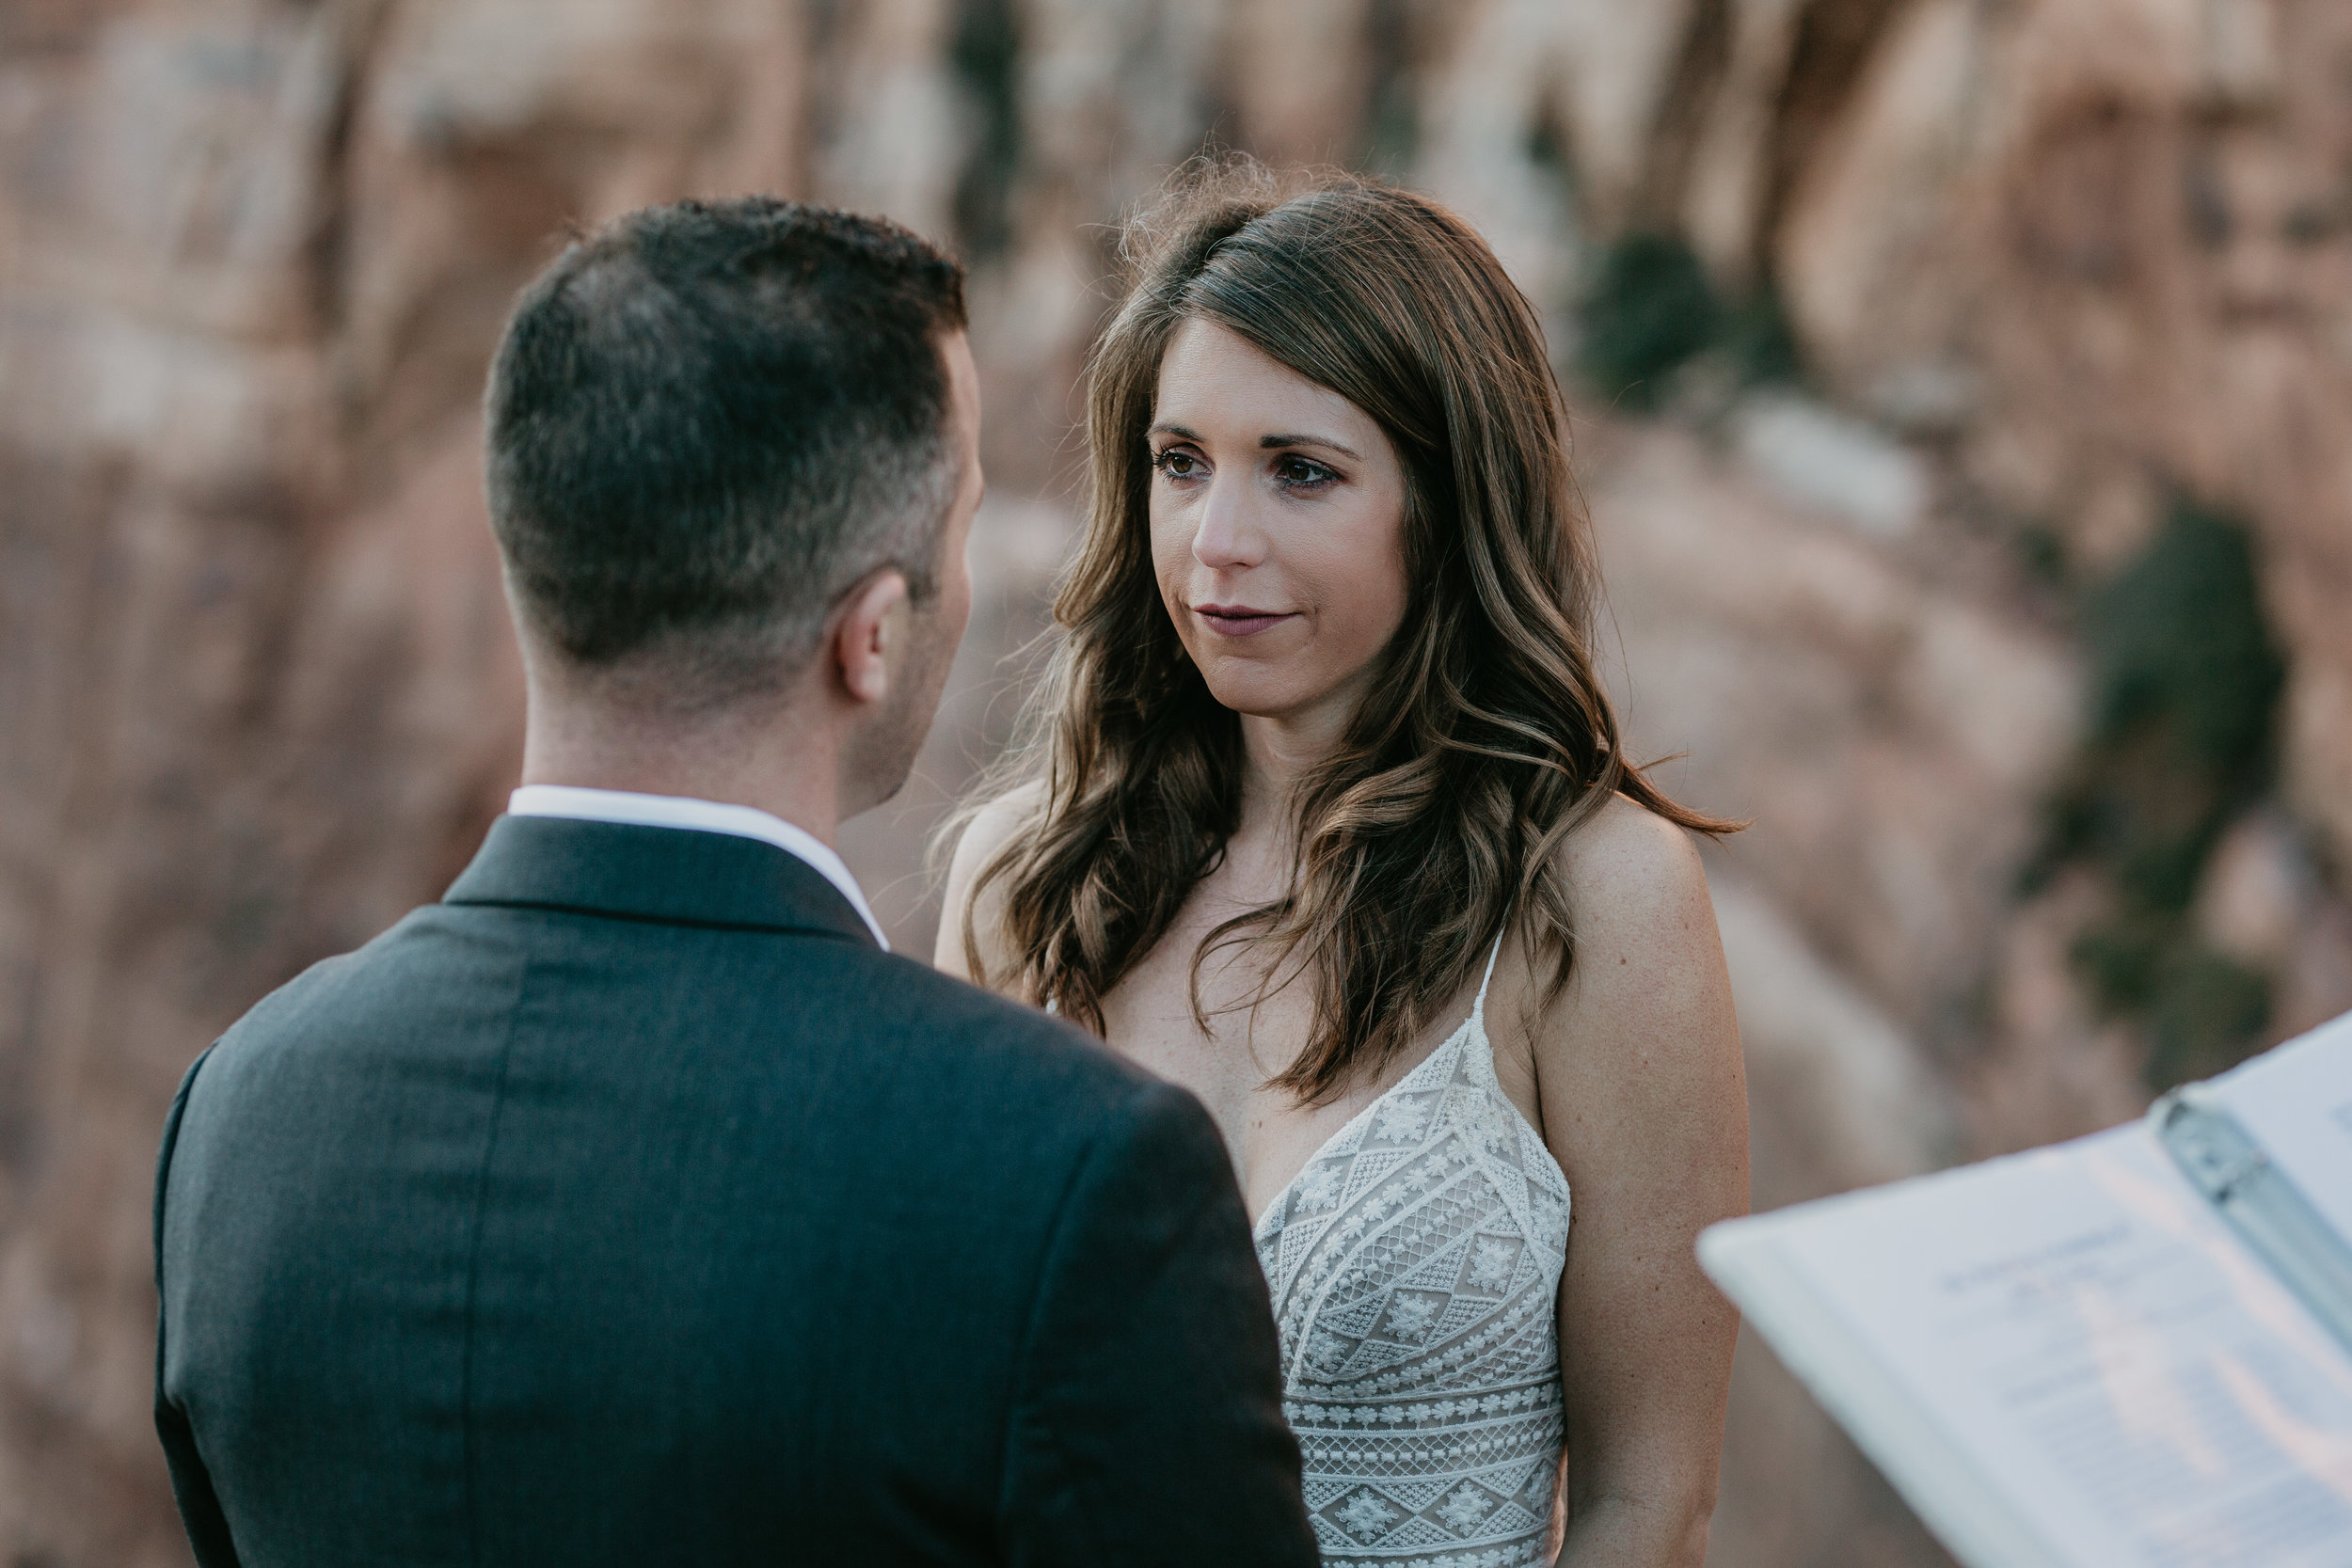 nicole-daacke-photography-zion-national-park-elopement-photographer-canyon-overlook-trail-elope-hiking-adventure-wedding-photos-fall-utah-red-rock-canyon-stgeorge-eloping-photographer-50.jpg